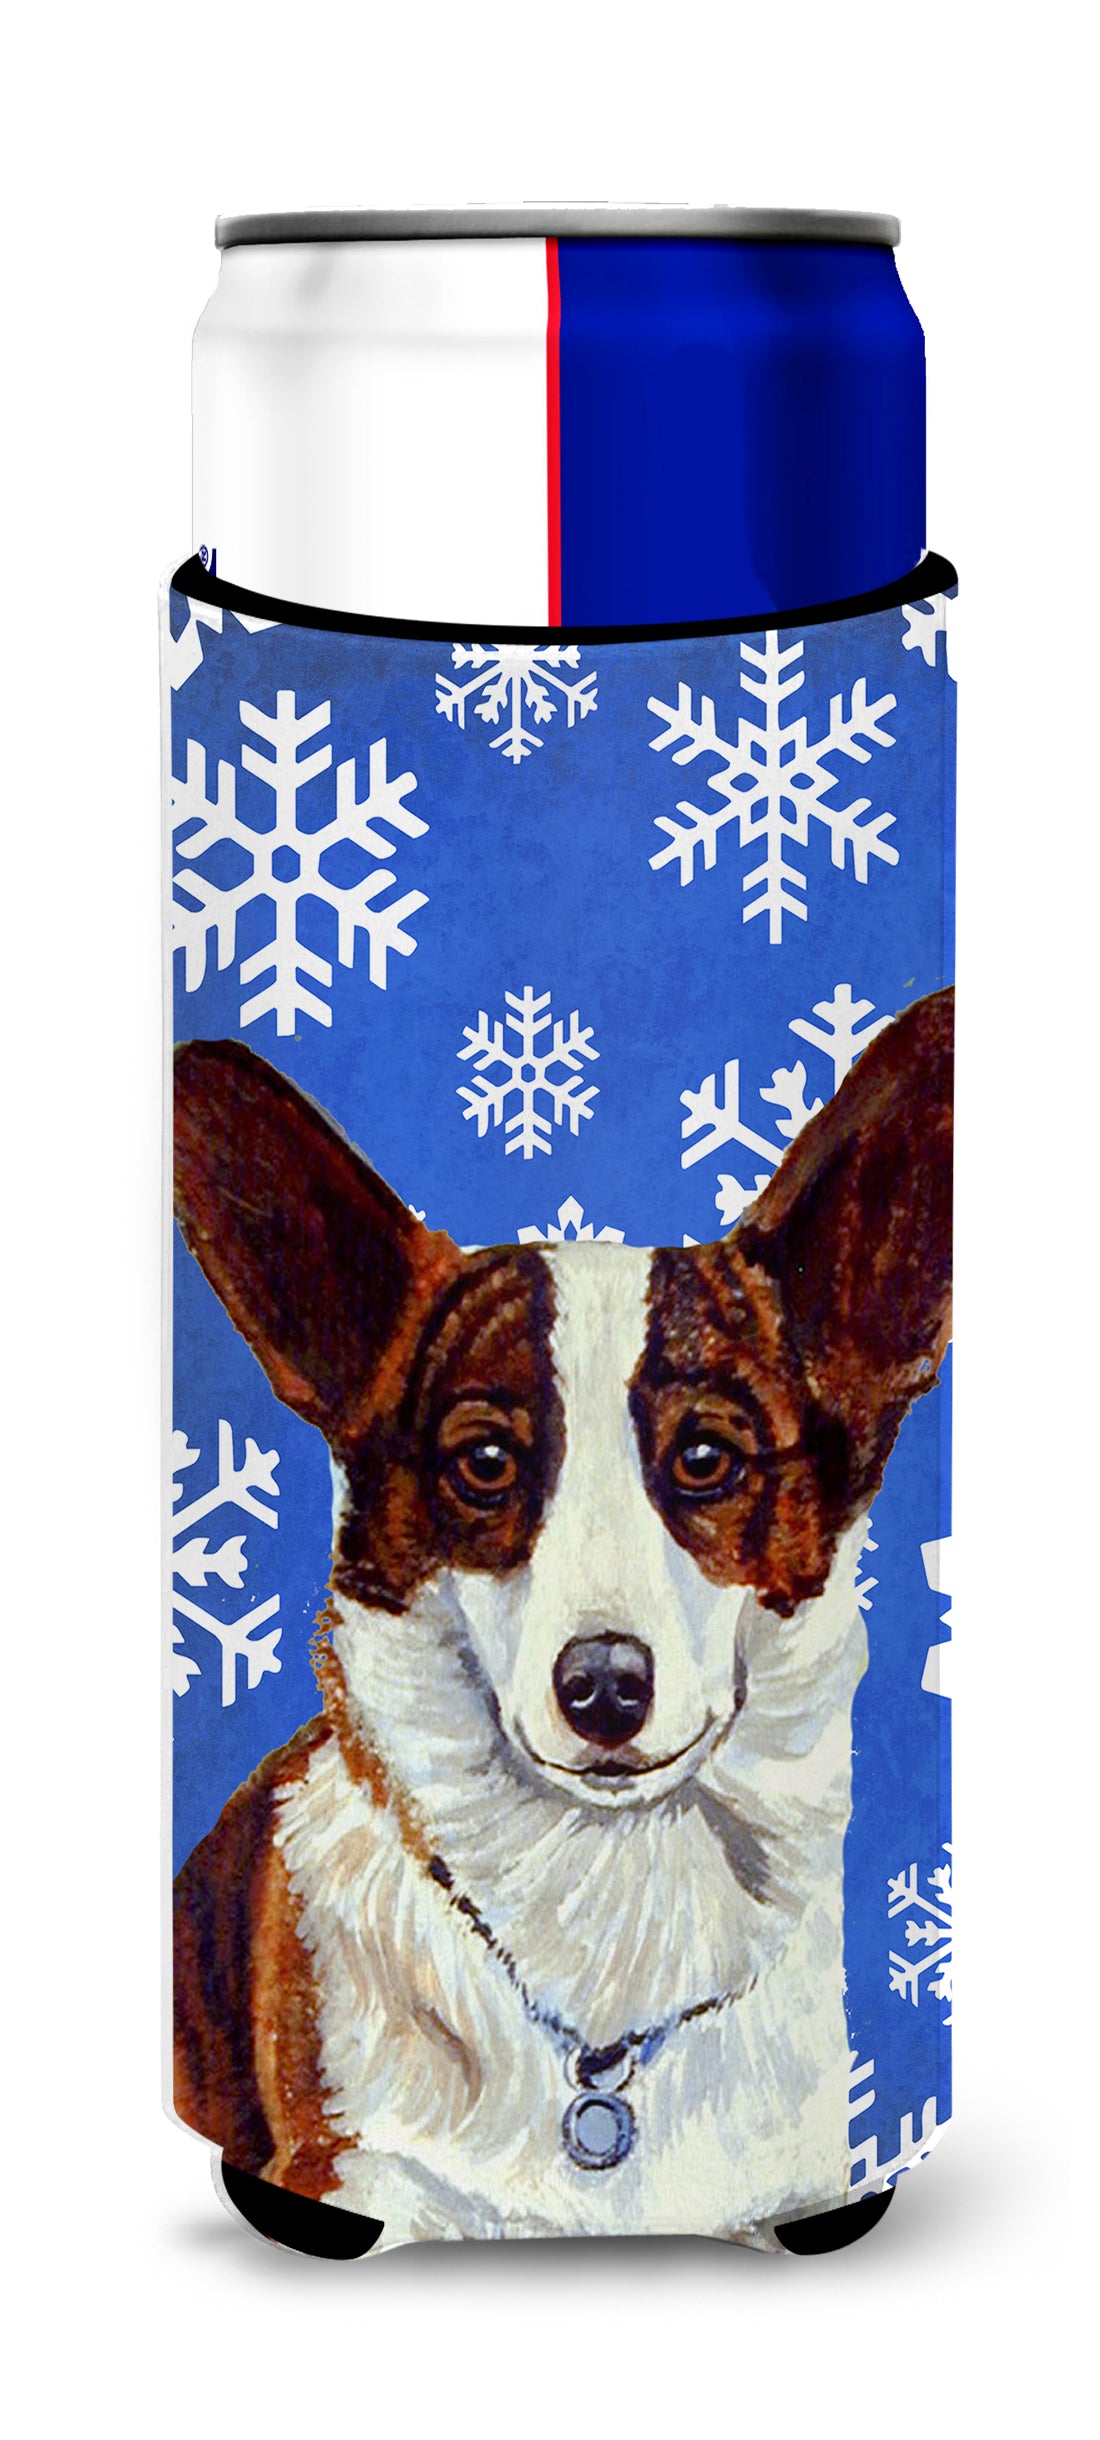 Corgi Winter Snowflakes Holiday Ultra Beverage Insulators for slim cans LH9288MUK.